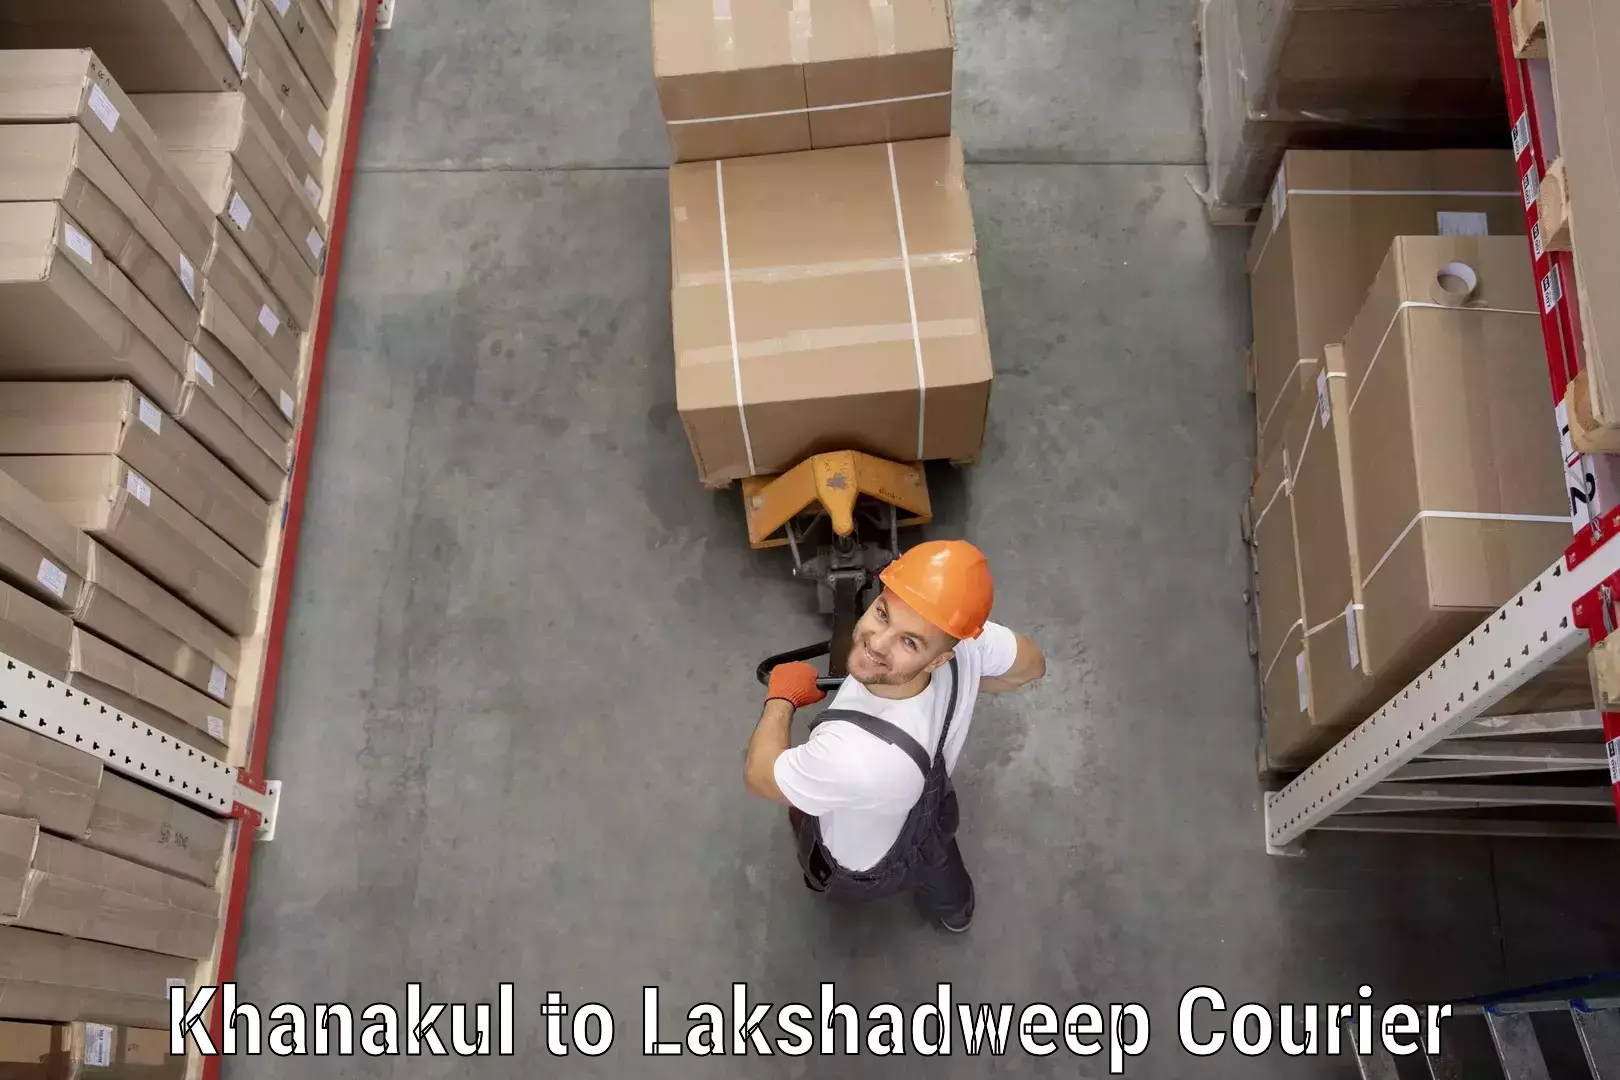 Multi-service courier options Khanakul to Lakshadweep